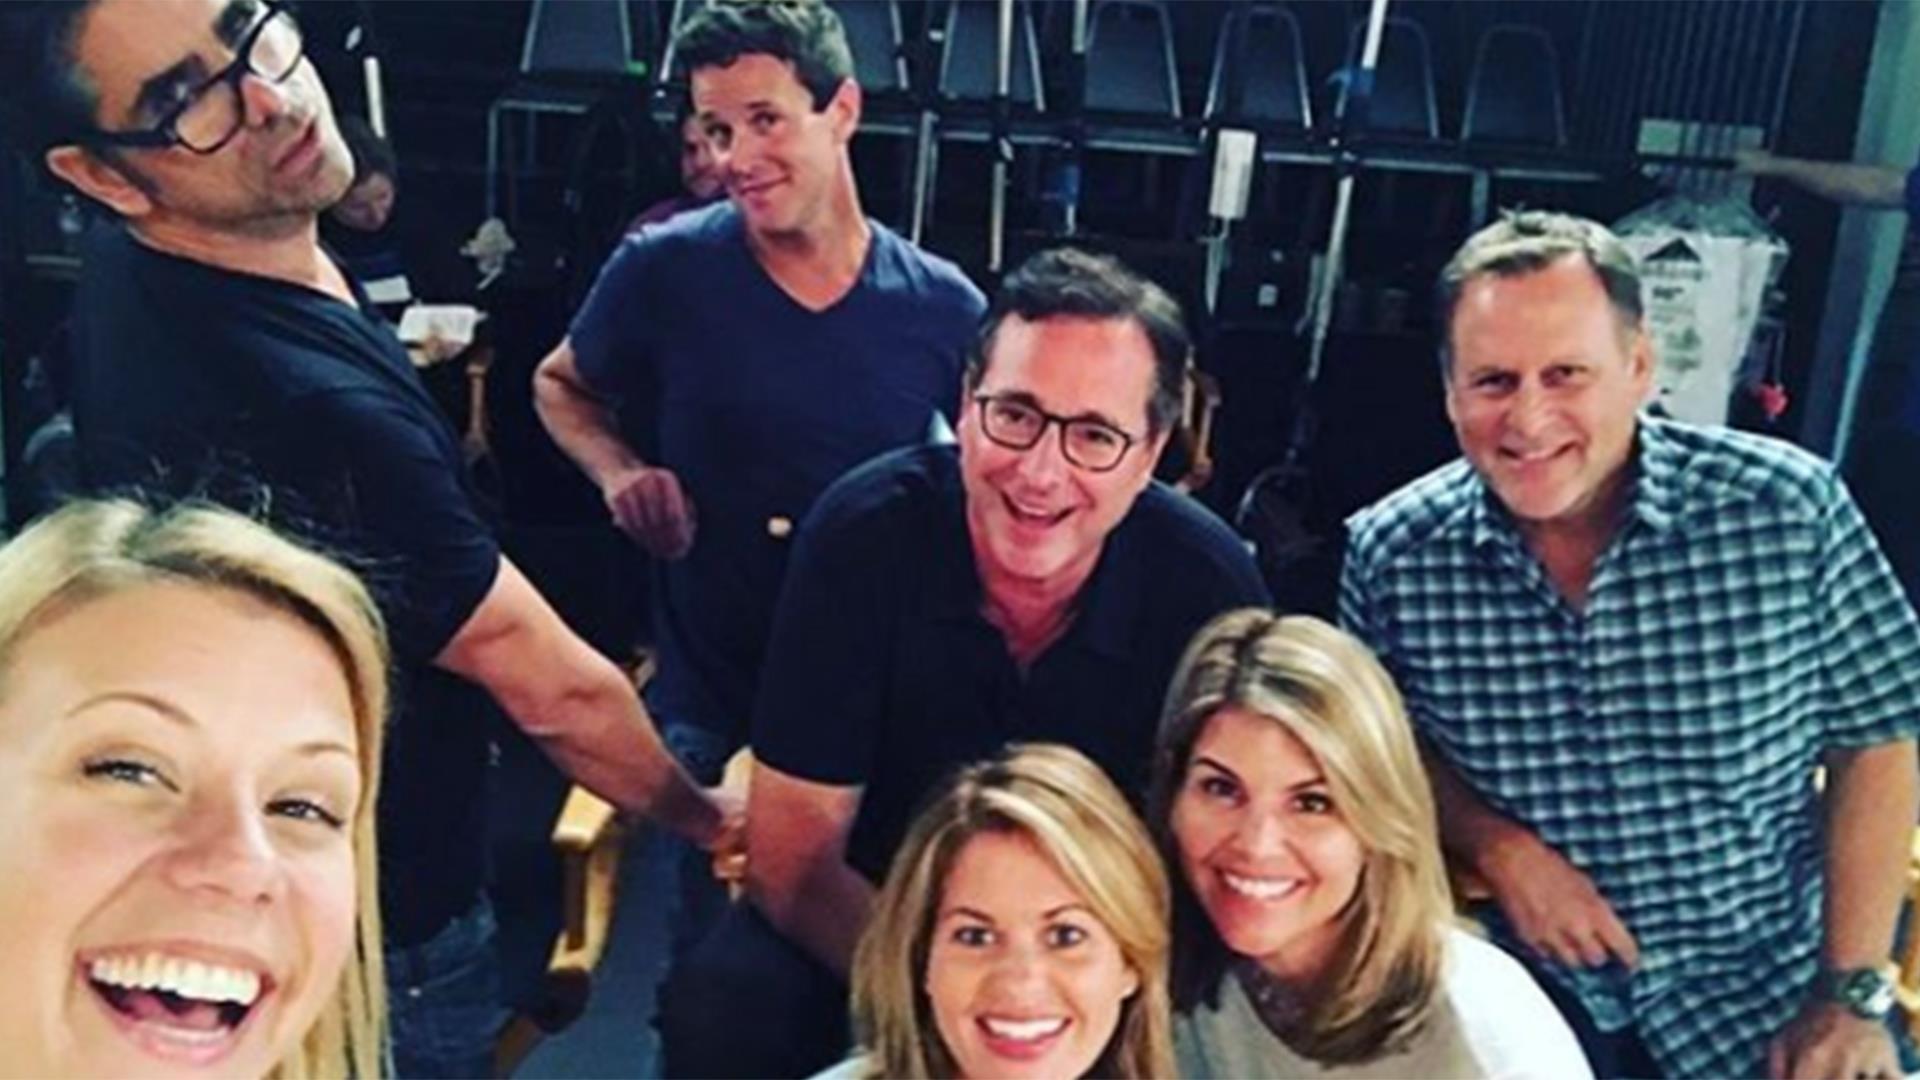 EXCLUSIVE: Candace Cameron Bure on 'Fuller House's 'Generations' of Fans  and Her Teenage Crush